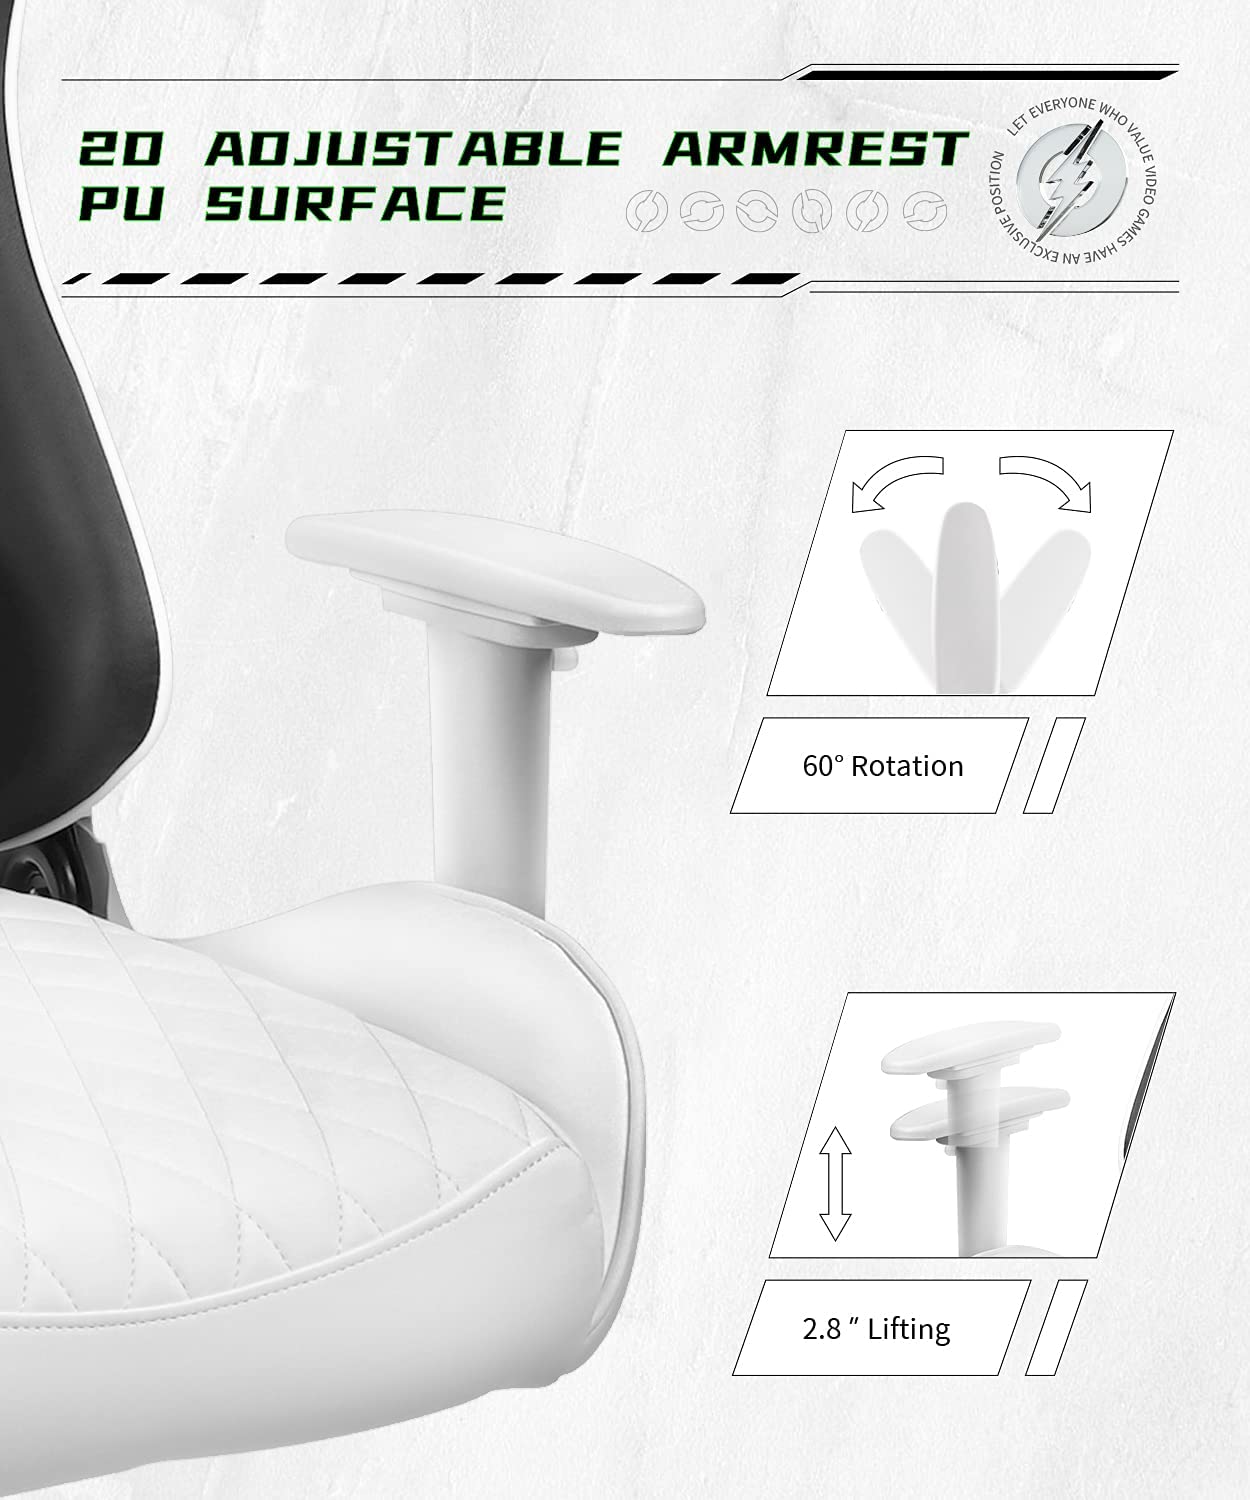 BestOffice PC Gaming Chair Ergonomic Office Chair Desk Chair with Lumbar  Support